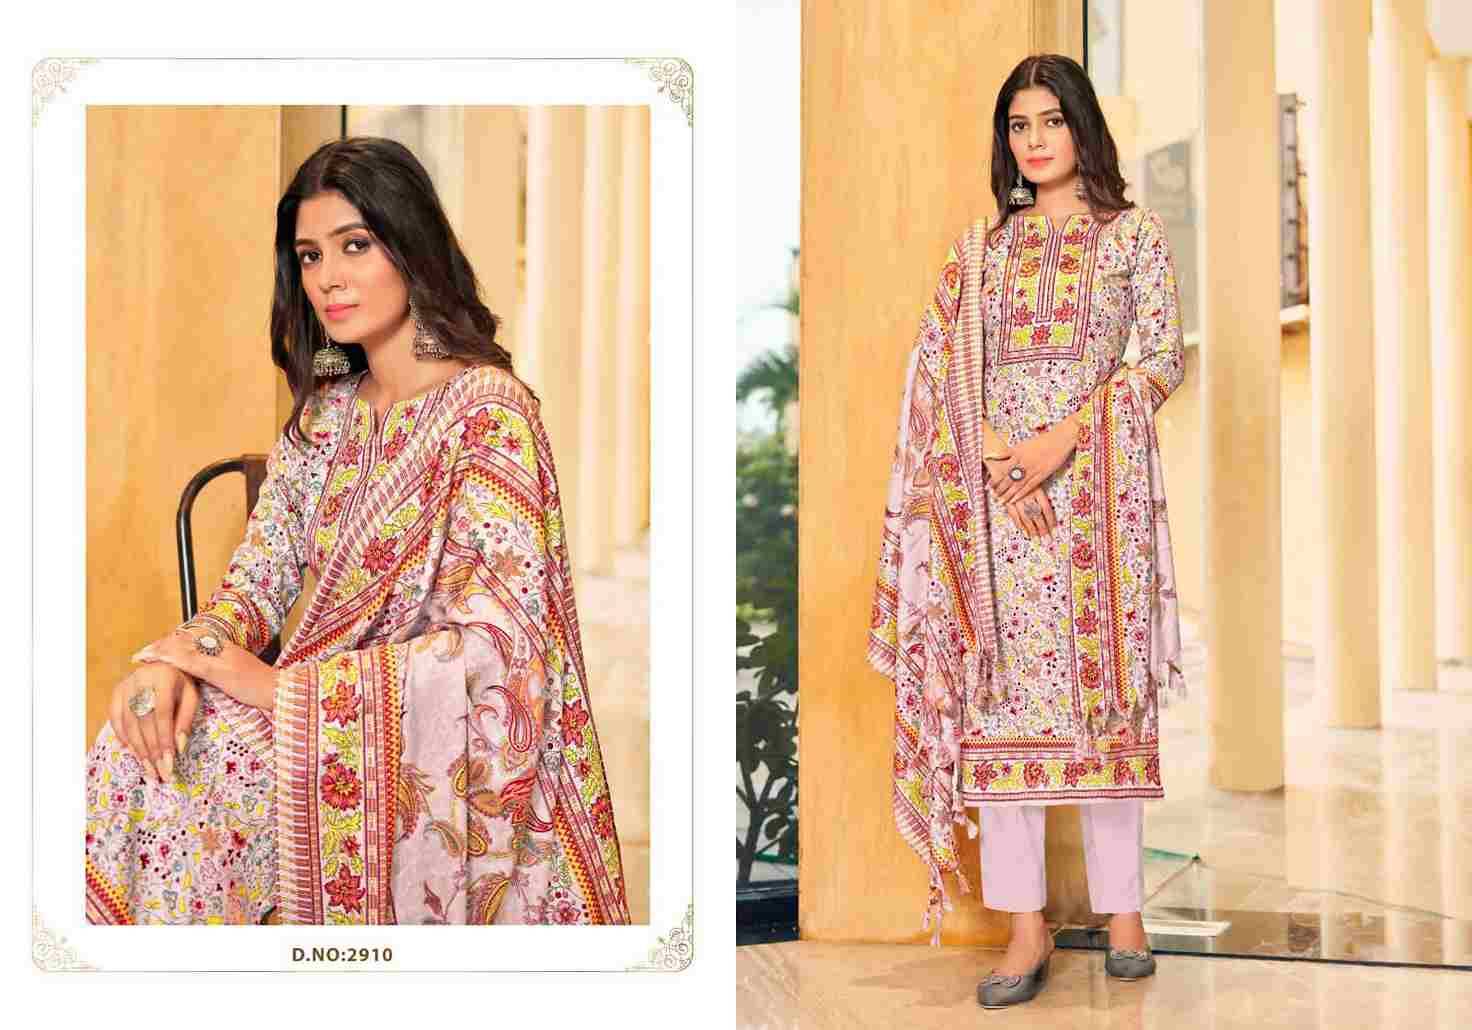 Gulfam Kali Vol-29 By Radha Fab 2901 To 2910 Series Beautiful Festive Suits Stylish Fancy Colorful Casual Wear & Ethnic Wear Pure Pashmina Digital Print Dresses At Wholesale Price